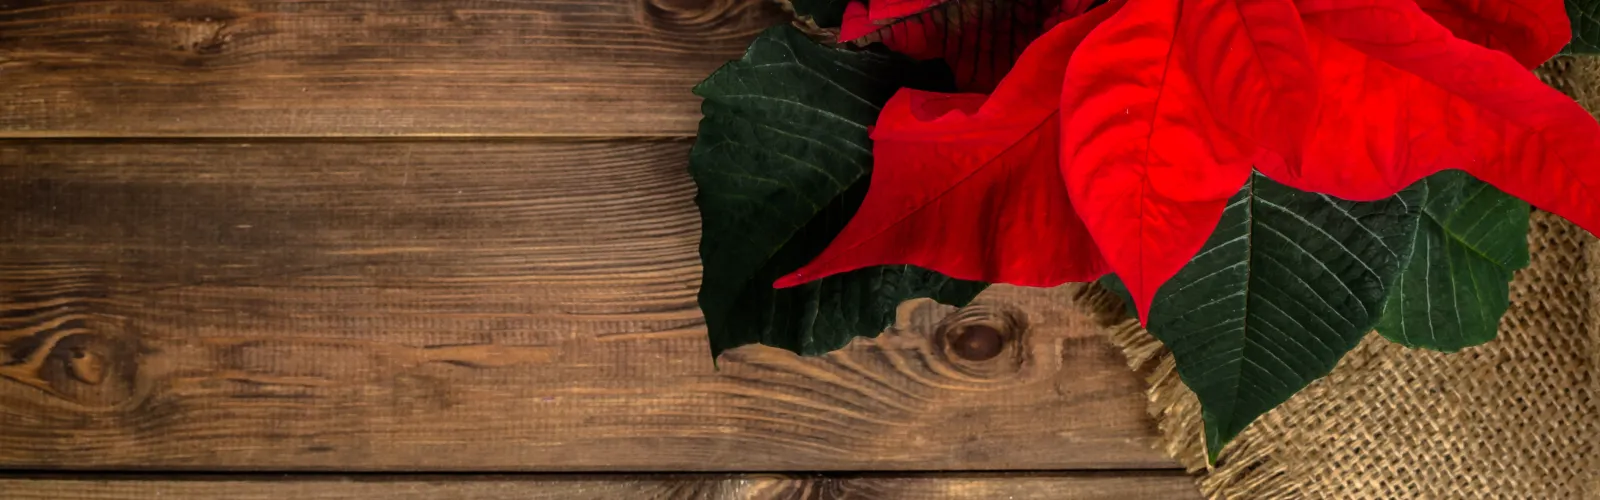 a red poinsettia on a wooden table